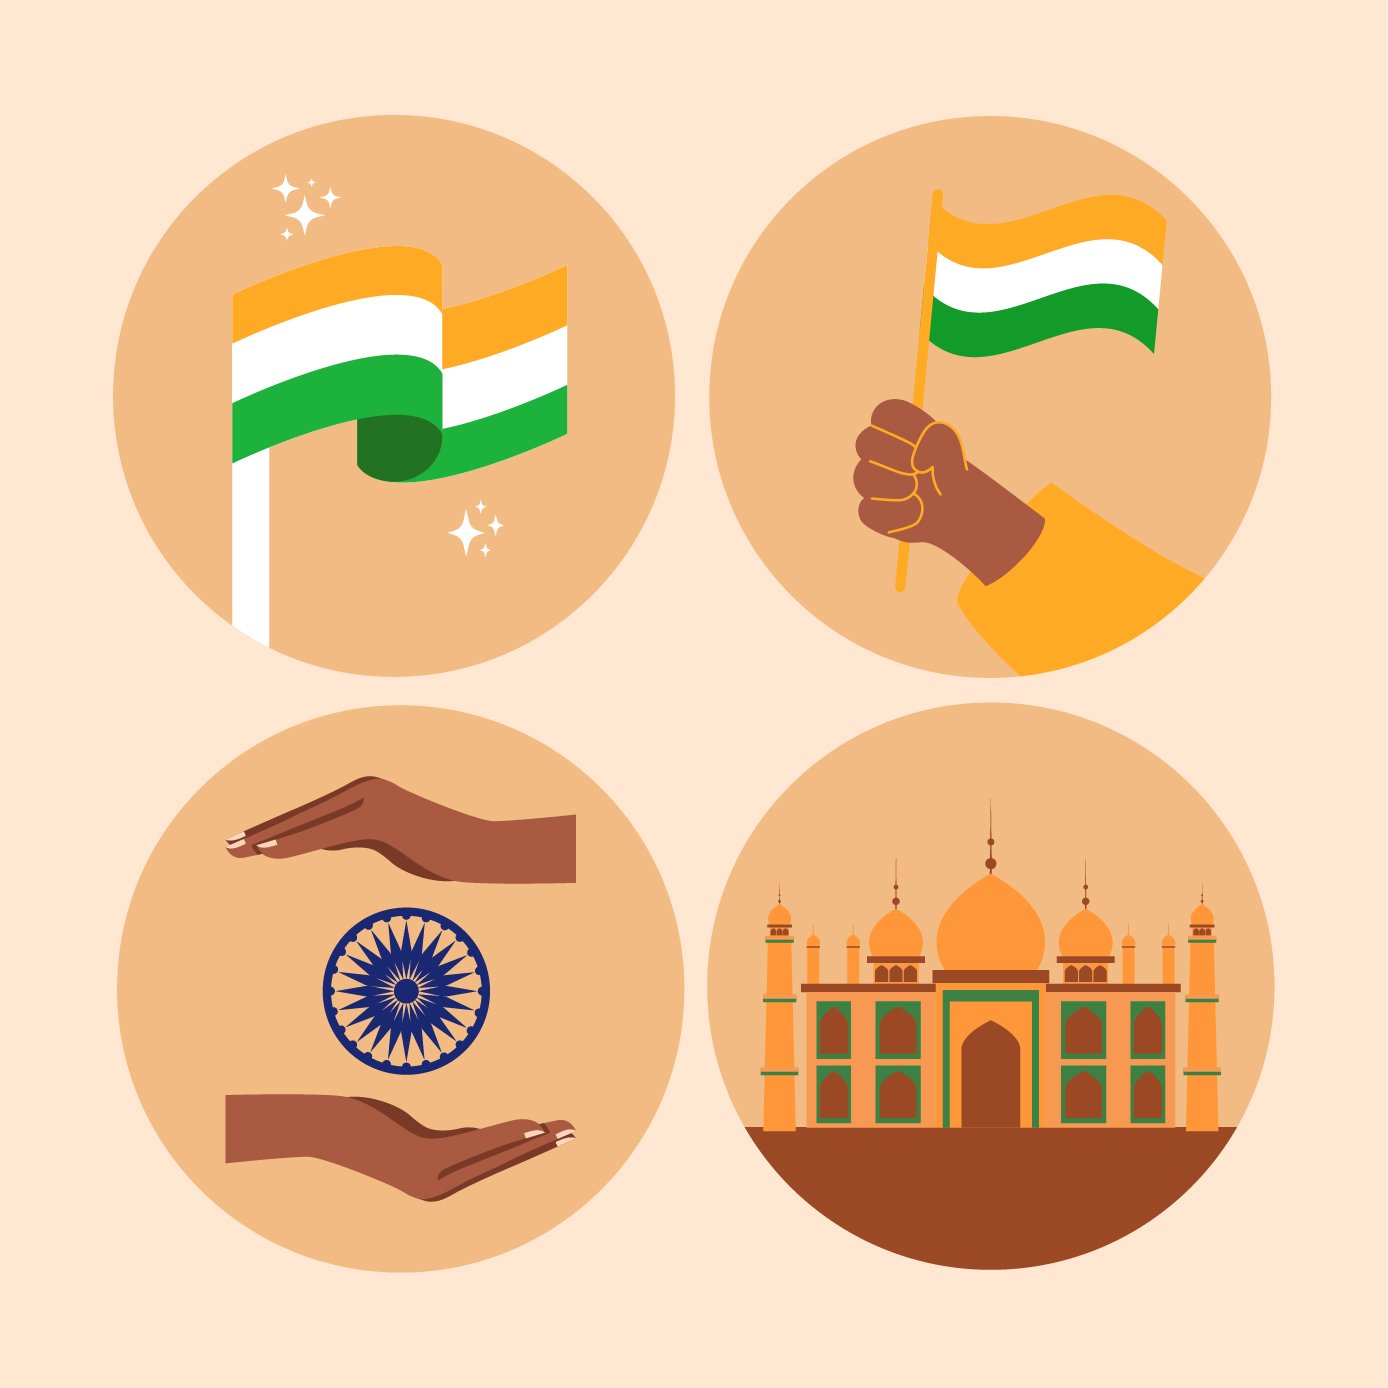 Free Republic Day Icon Vector in Illustrator, PSD, EPS, SVG, JPG, PNG, JPEG